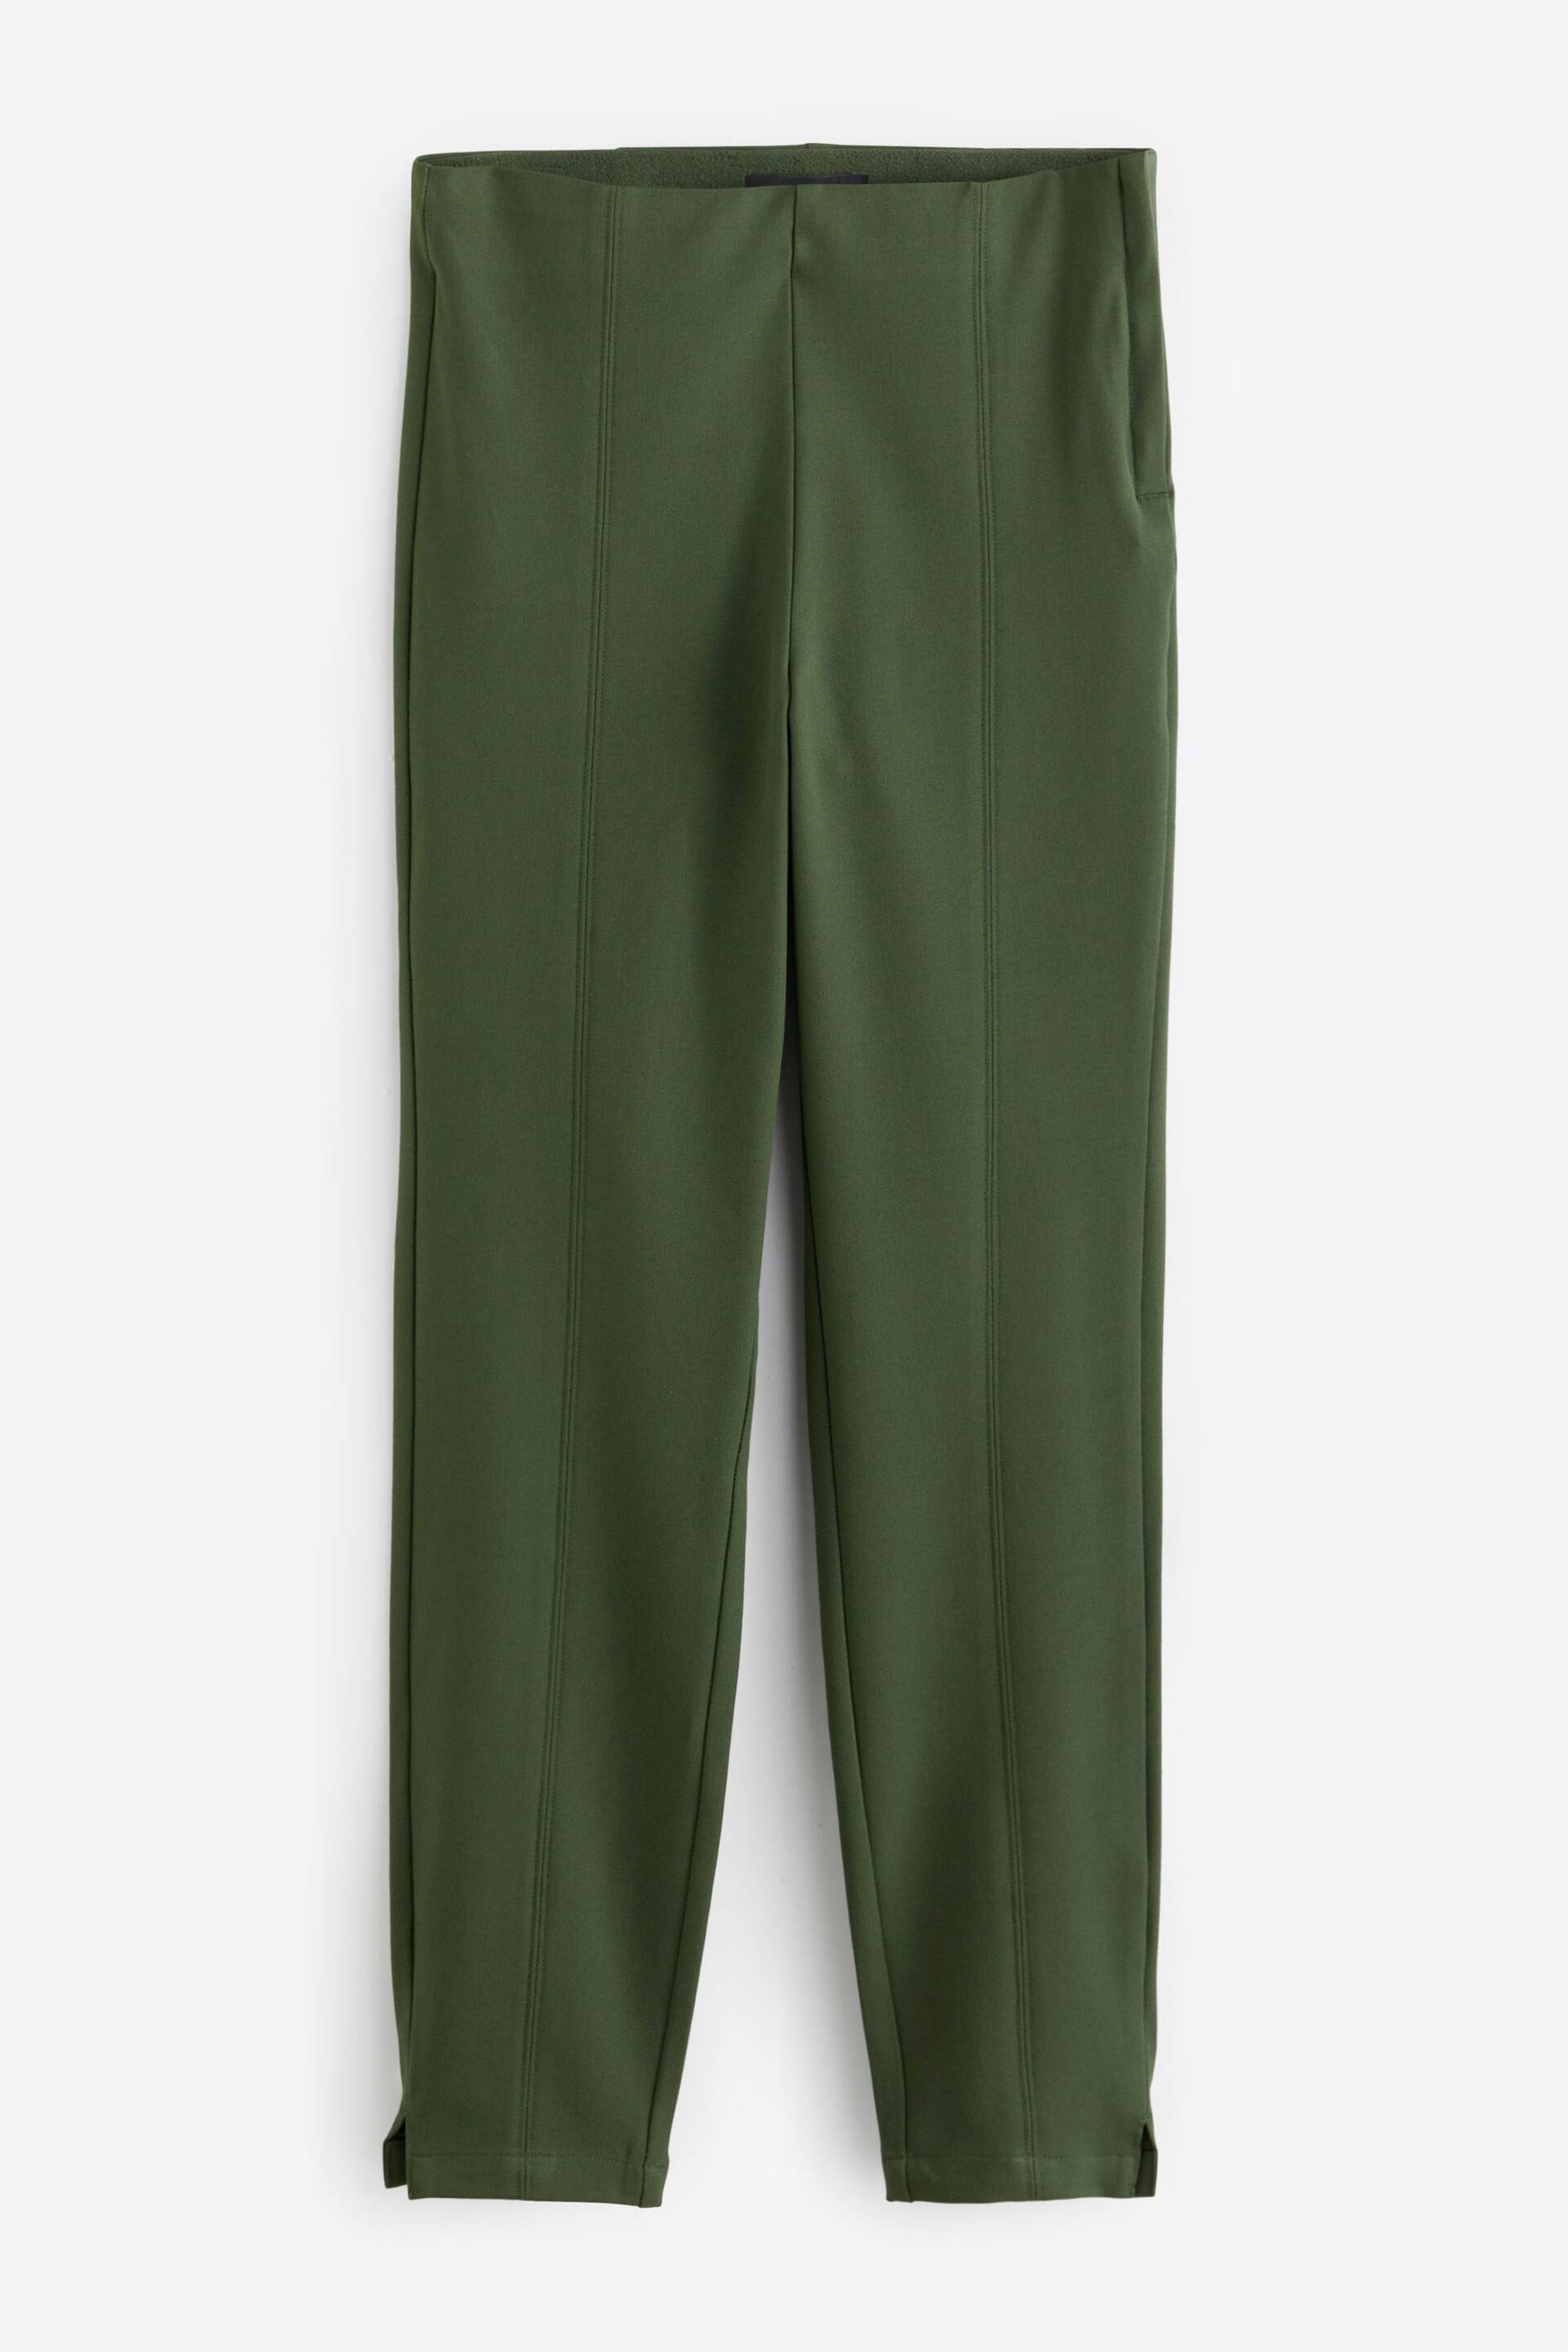 Khaki Green Ultimate Stretch Skinny Trousers - Image 5 of 6